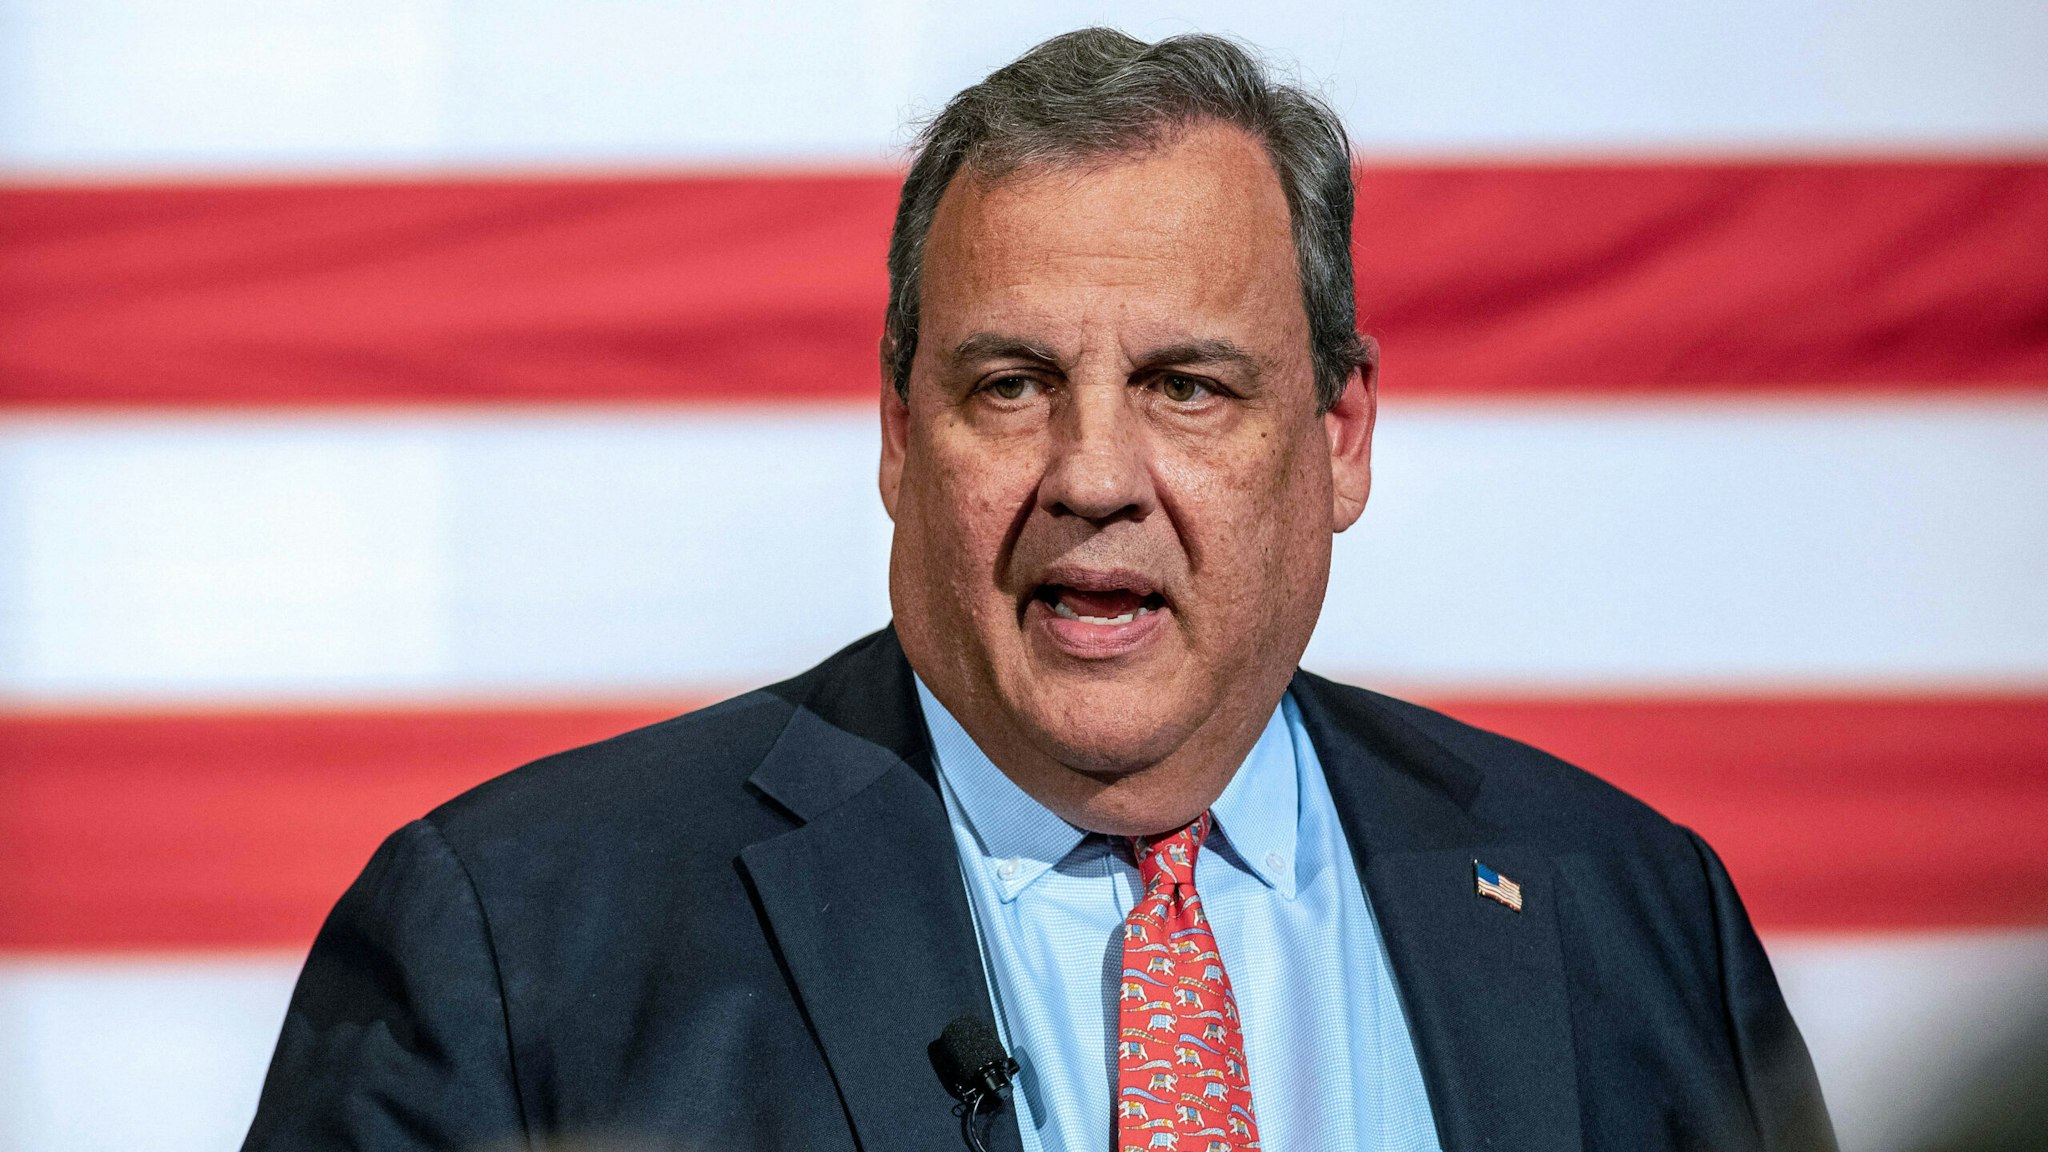 Former New Jersey Governor Chris Christie speaks during a New Hampshire Town Hall at Saint Anselm College in Goffstown, New Hampshire, on June 6, 2023. Christie is expected to announce his run for the presidency.